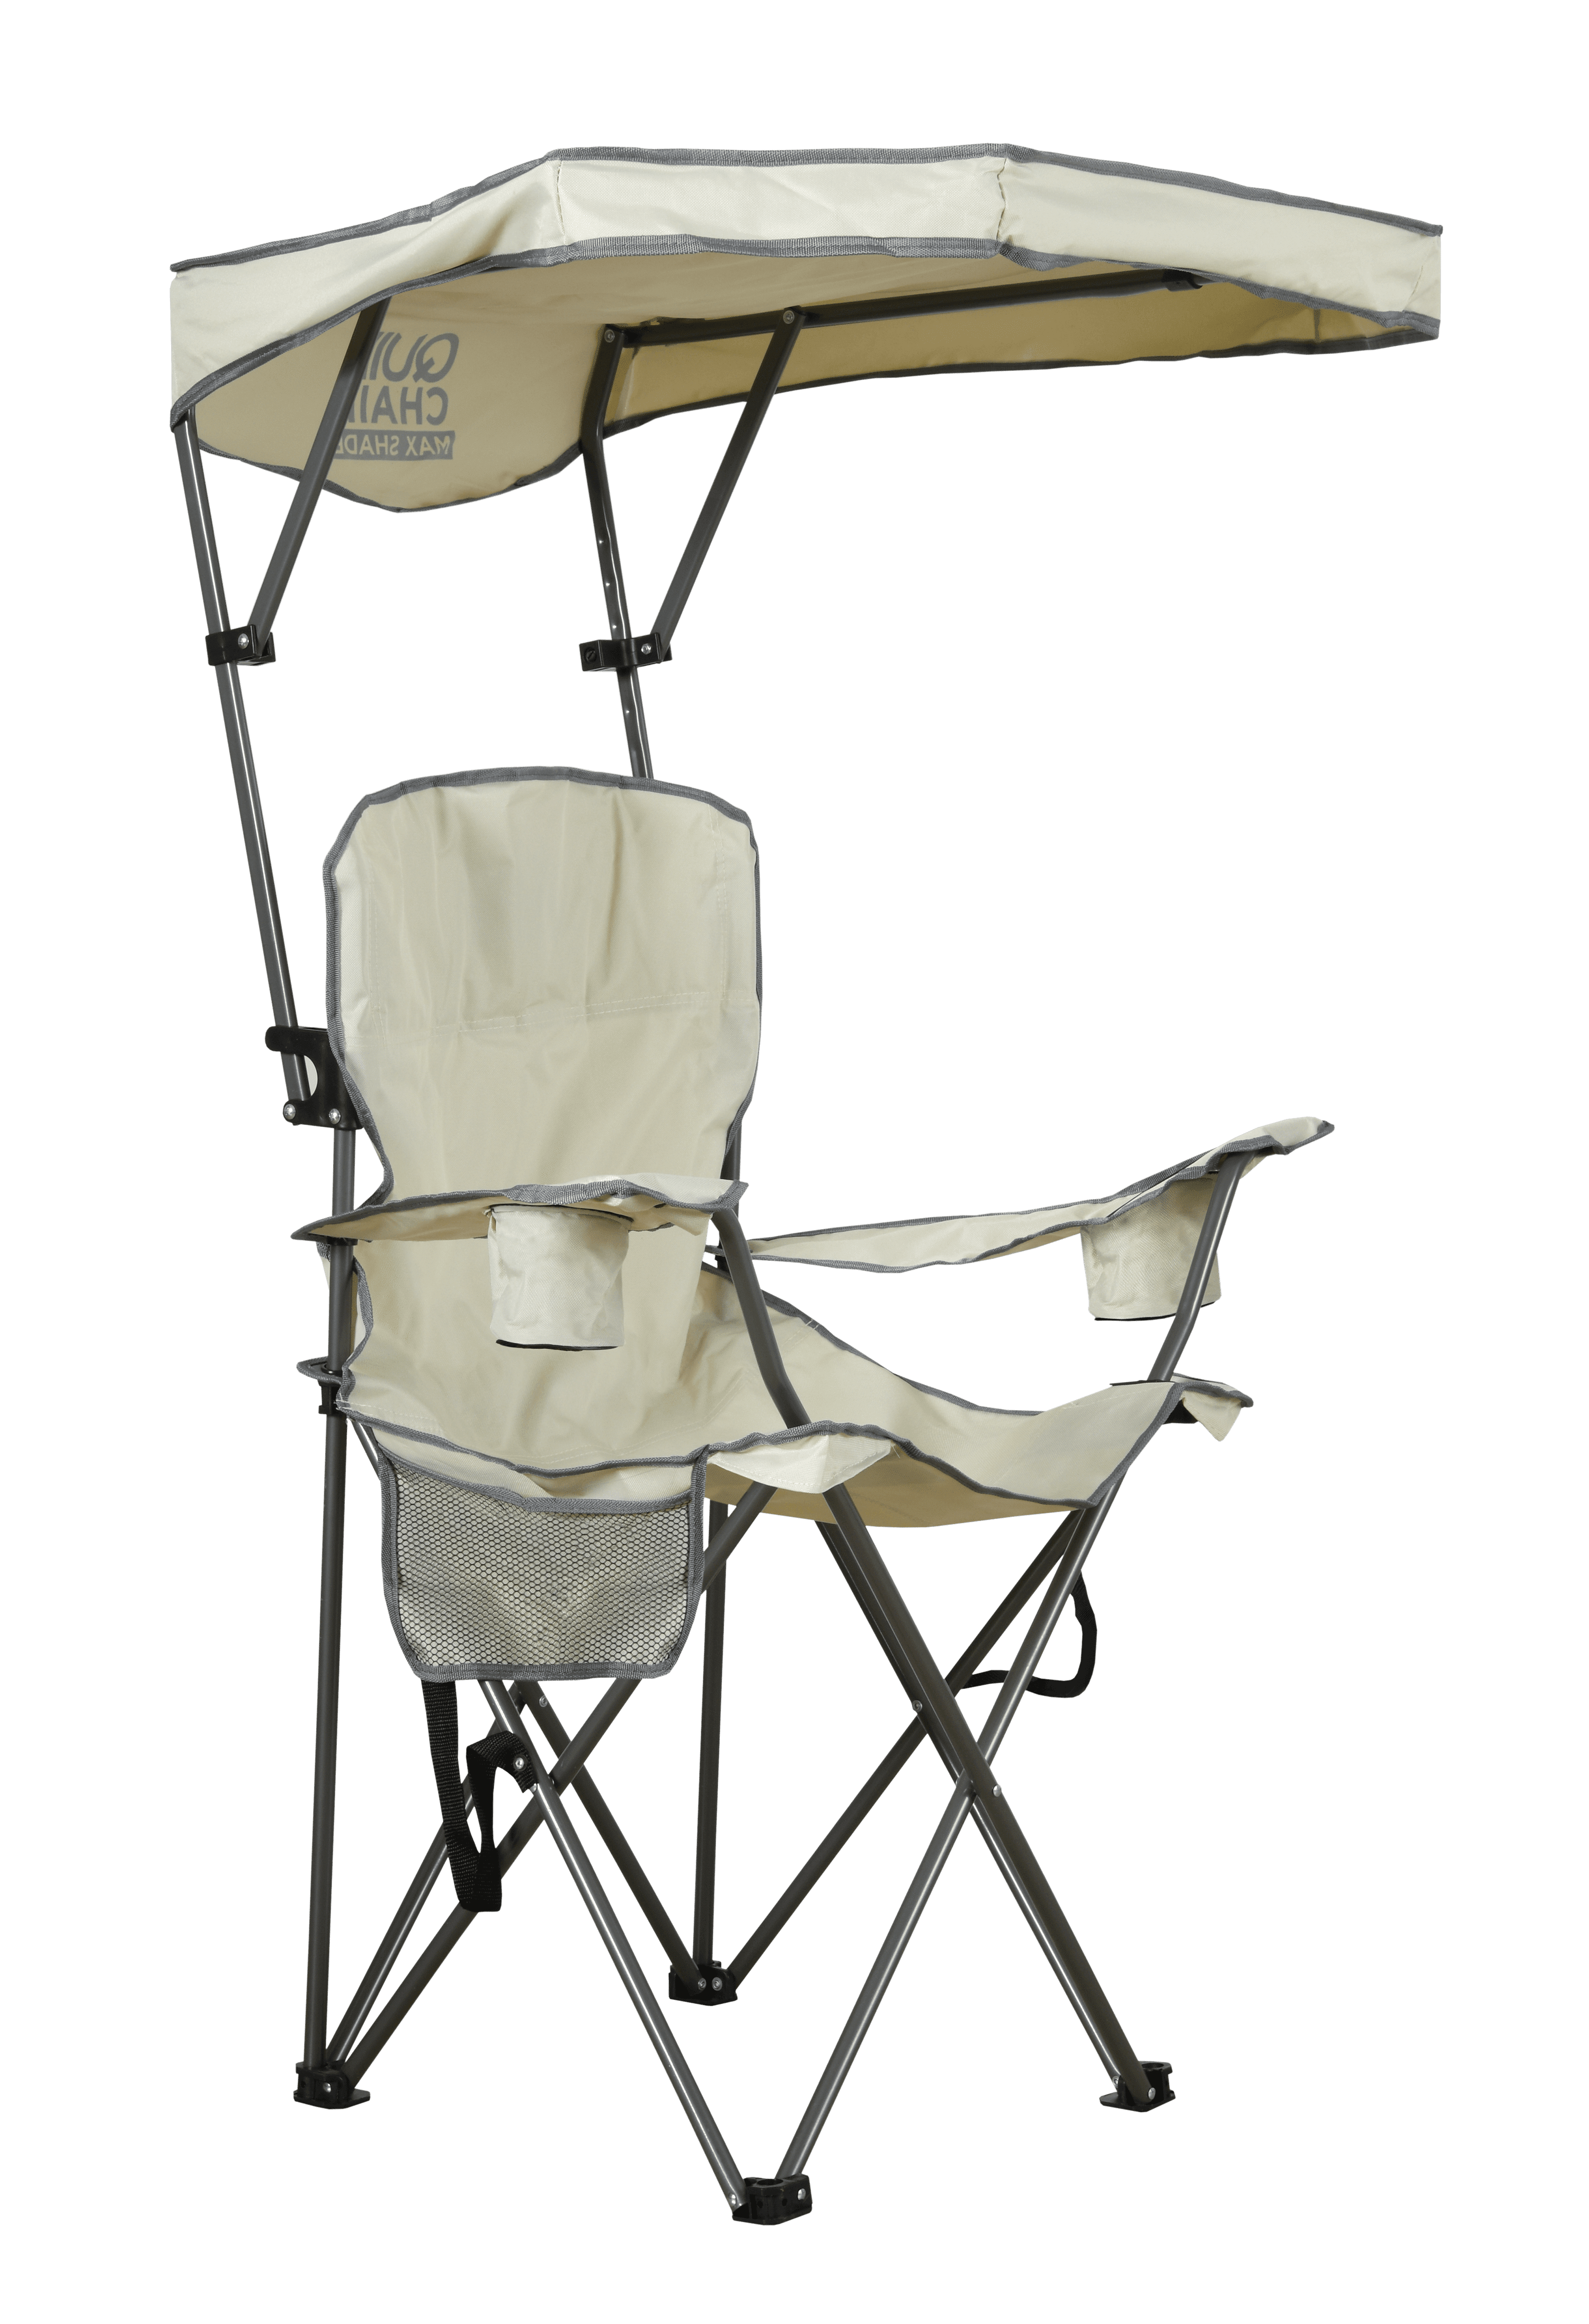 Quik Shade Max Shade High and Wide Folding Camp Chair with Tilt UV Sun Protection Canopy Khaki/Gray